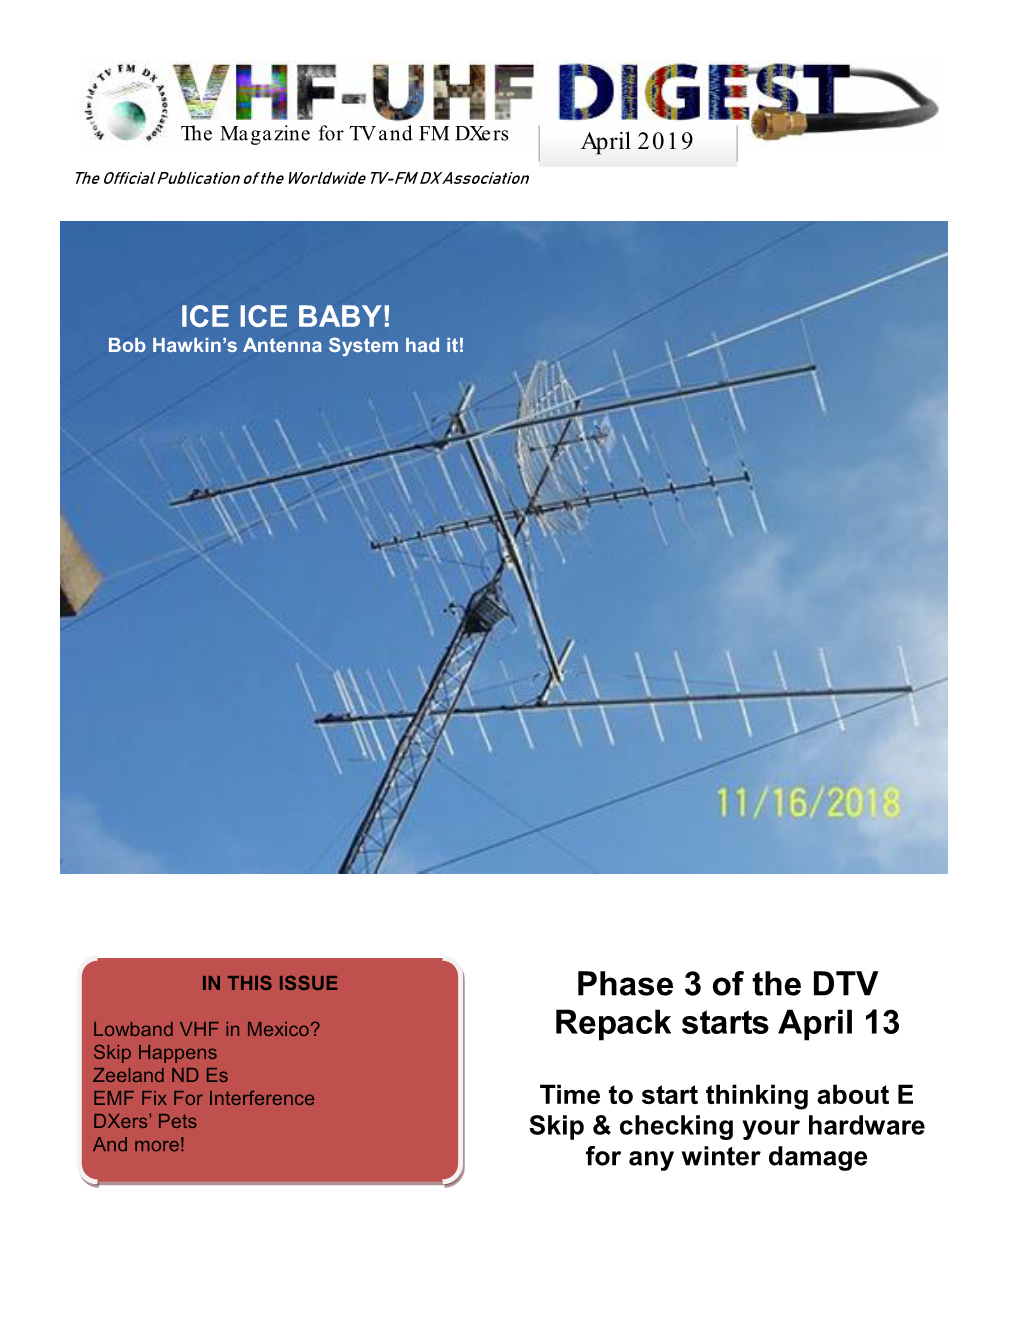 Phase 3 of the DTV Repack Starts April 13